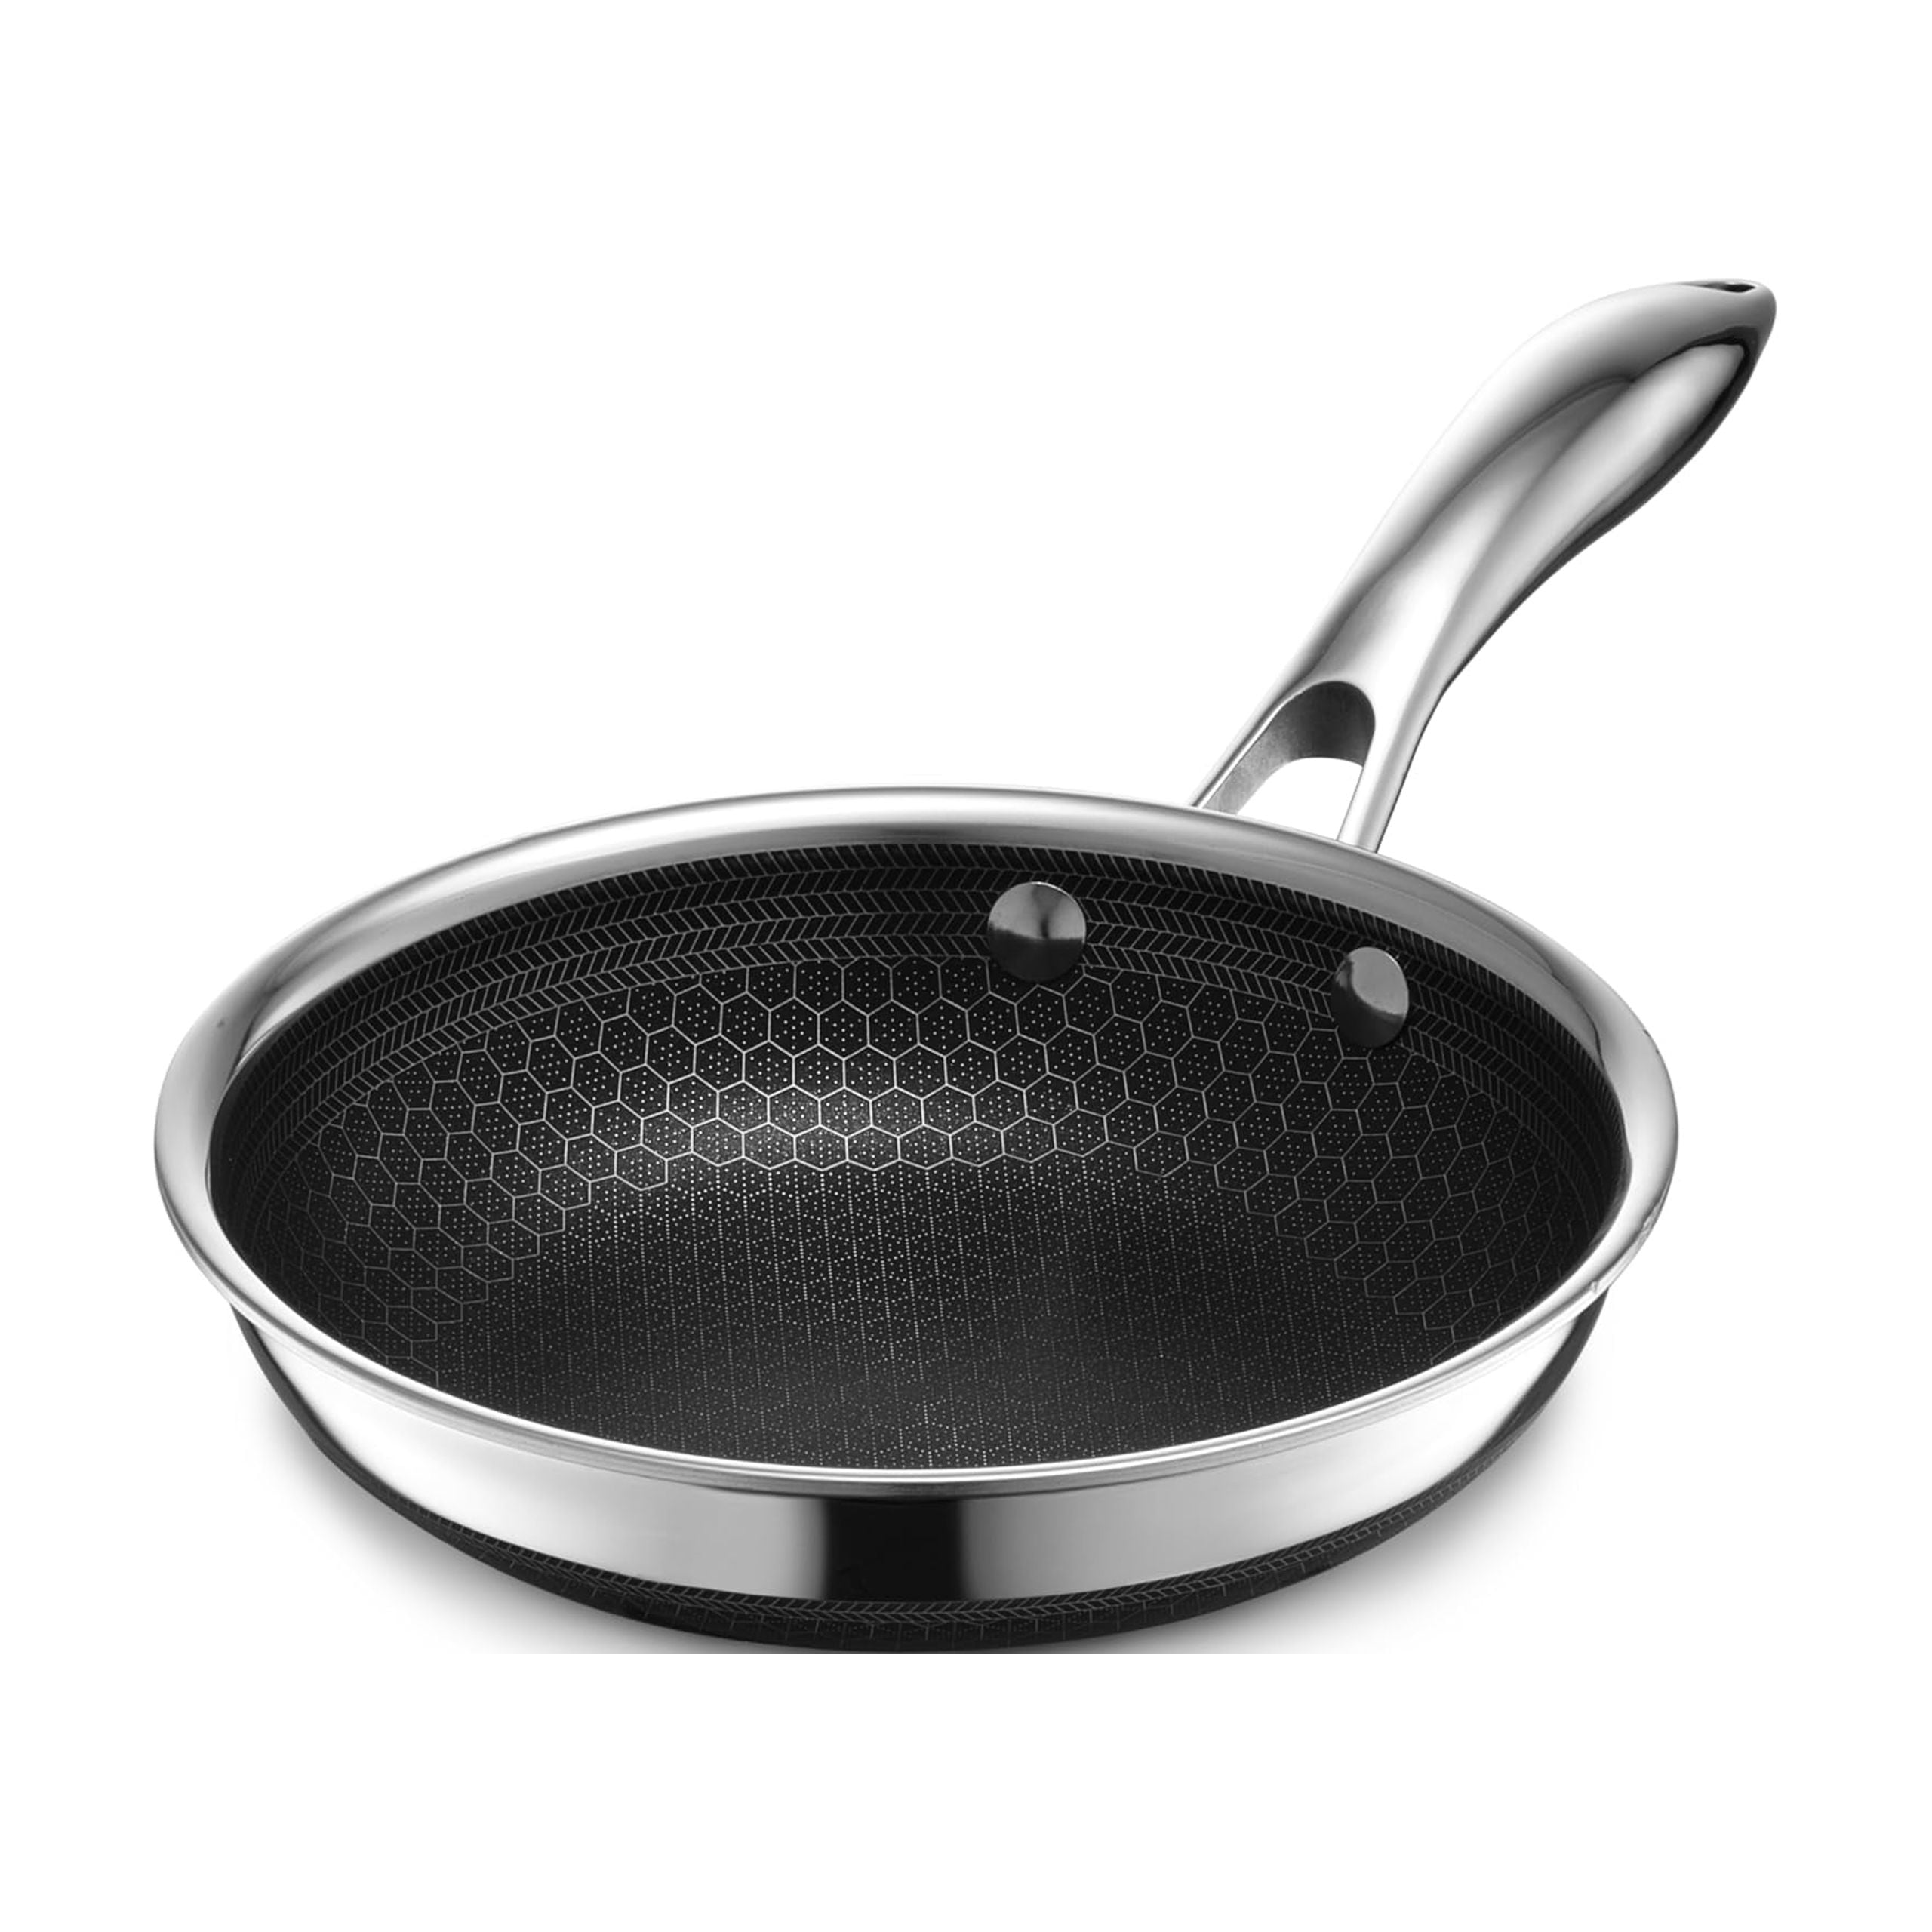 GRANITESTONE Nonstick Fry Pan with Lid, 10-inch Skillet with Glass Cover,  Dishwasher Safe, Warp Free and Stay Cool Handles, Black